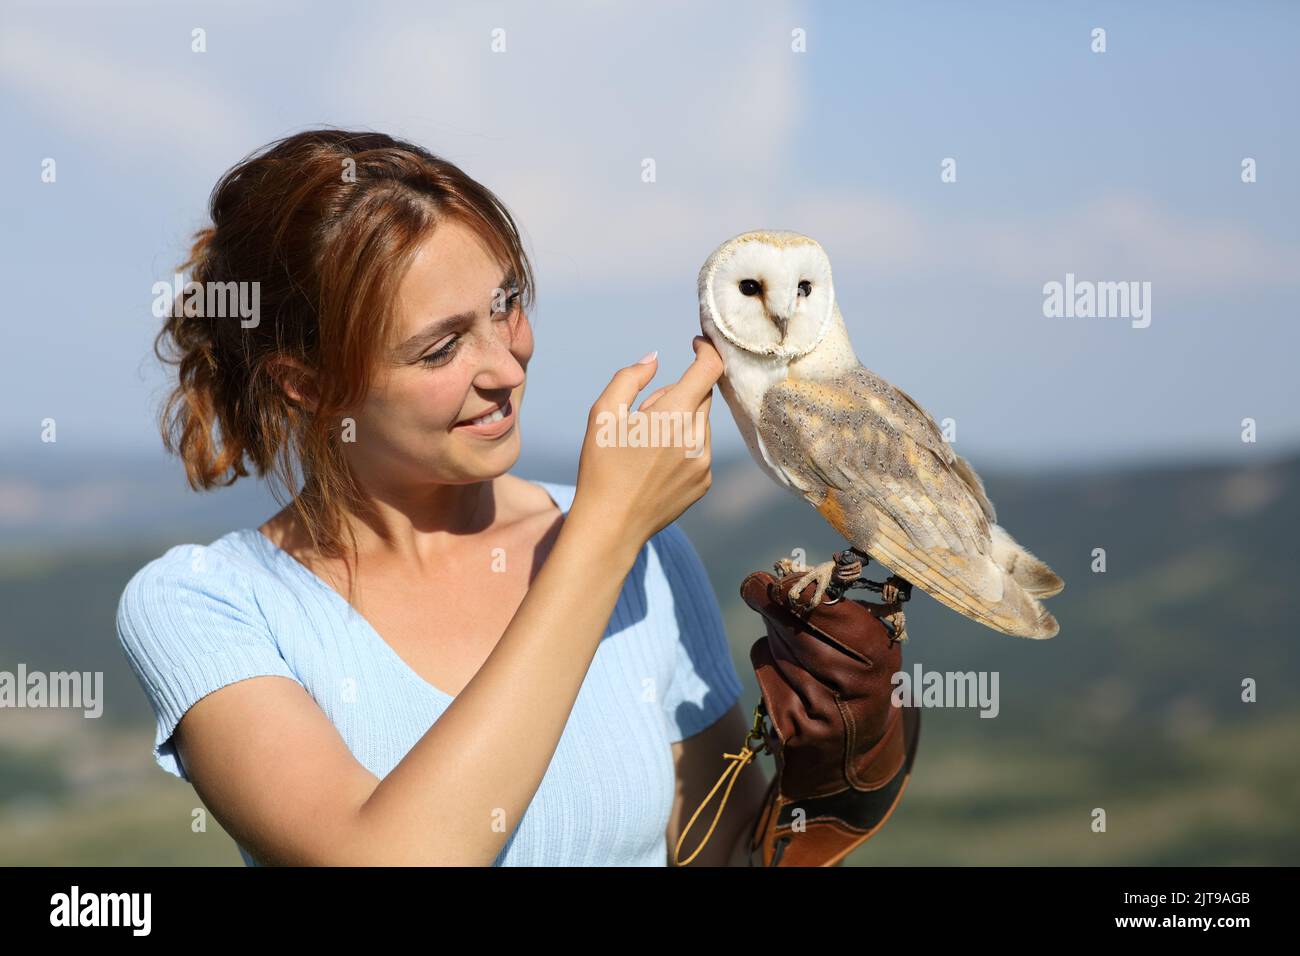 Happy falconer caressing an owl standing in nature Stock Photo